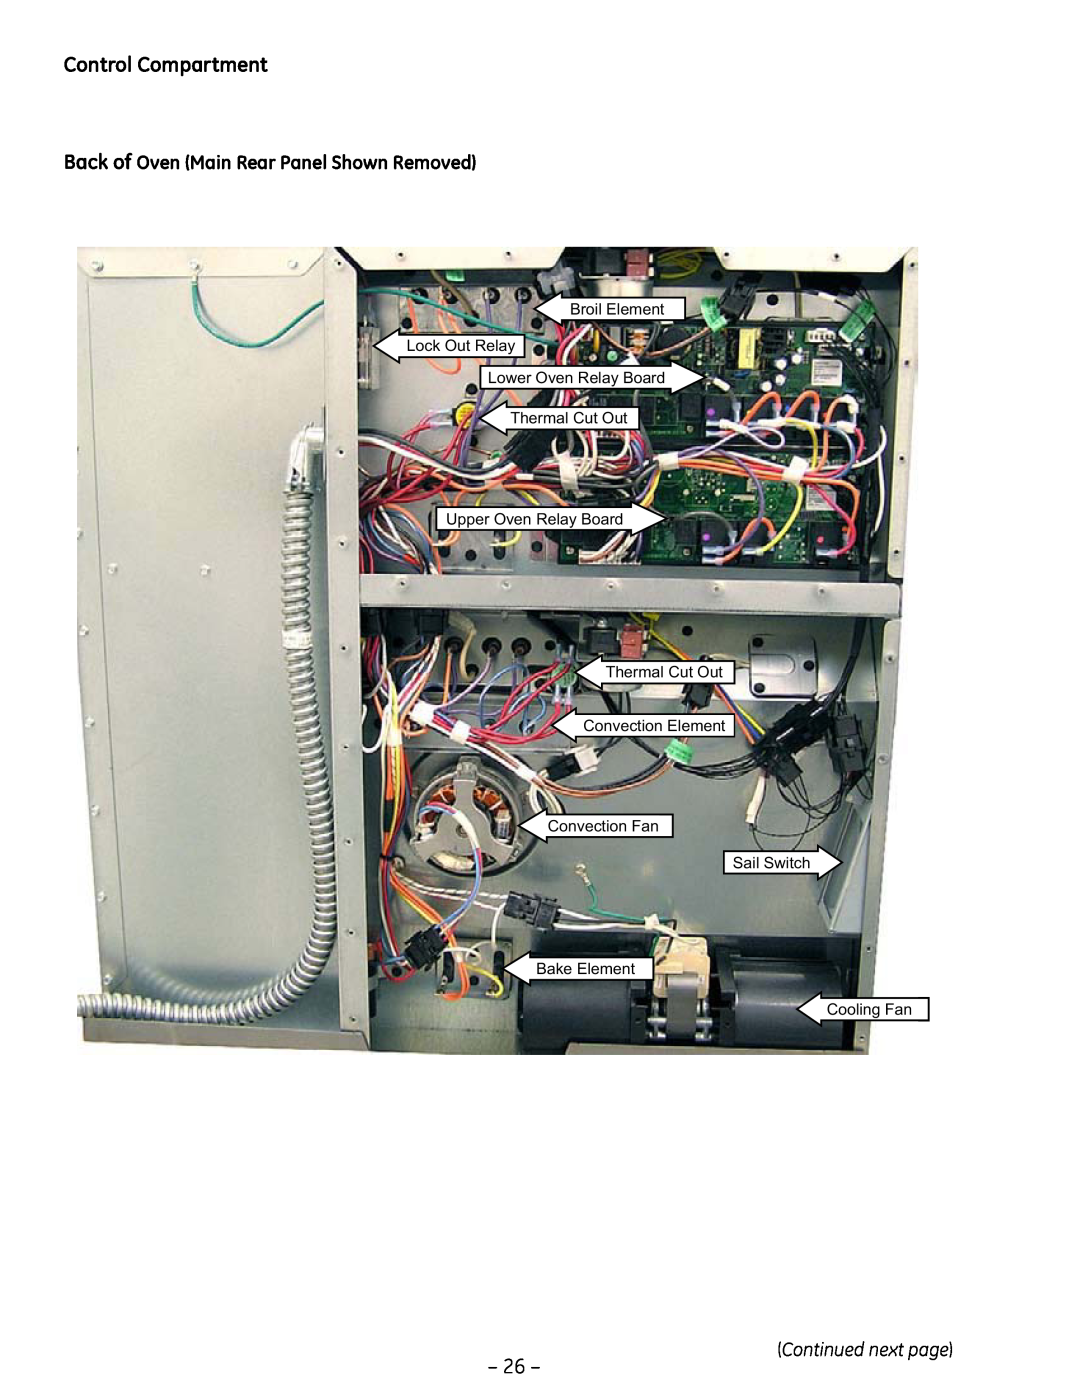 GE PT925 manual Control Compartment, Back of Oven Main Rear Panel Shown Removed 